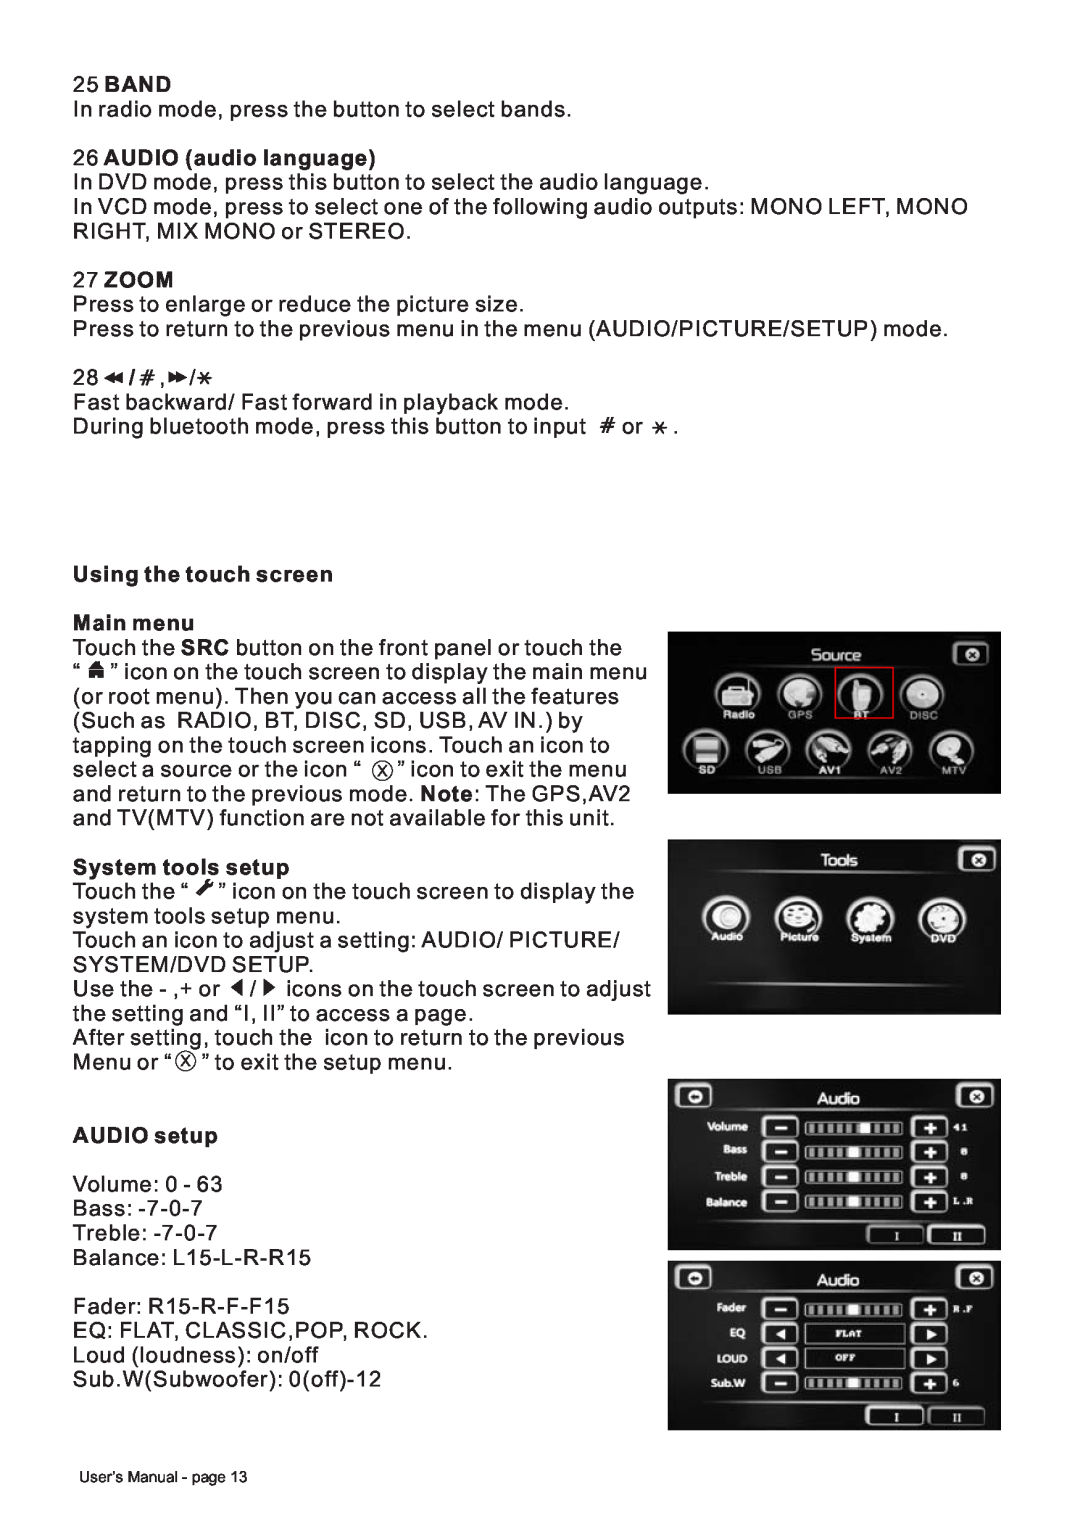 Boss Audio Systems BV8728B manual Band, AUDIO audio language, Zoom, Using the touch screen Main menu, System tools setup 